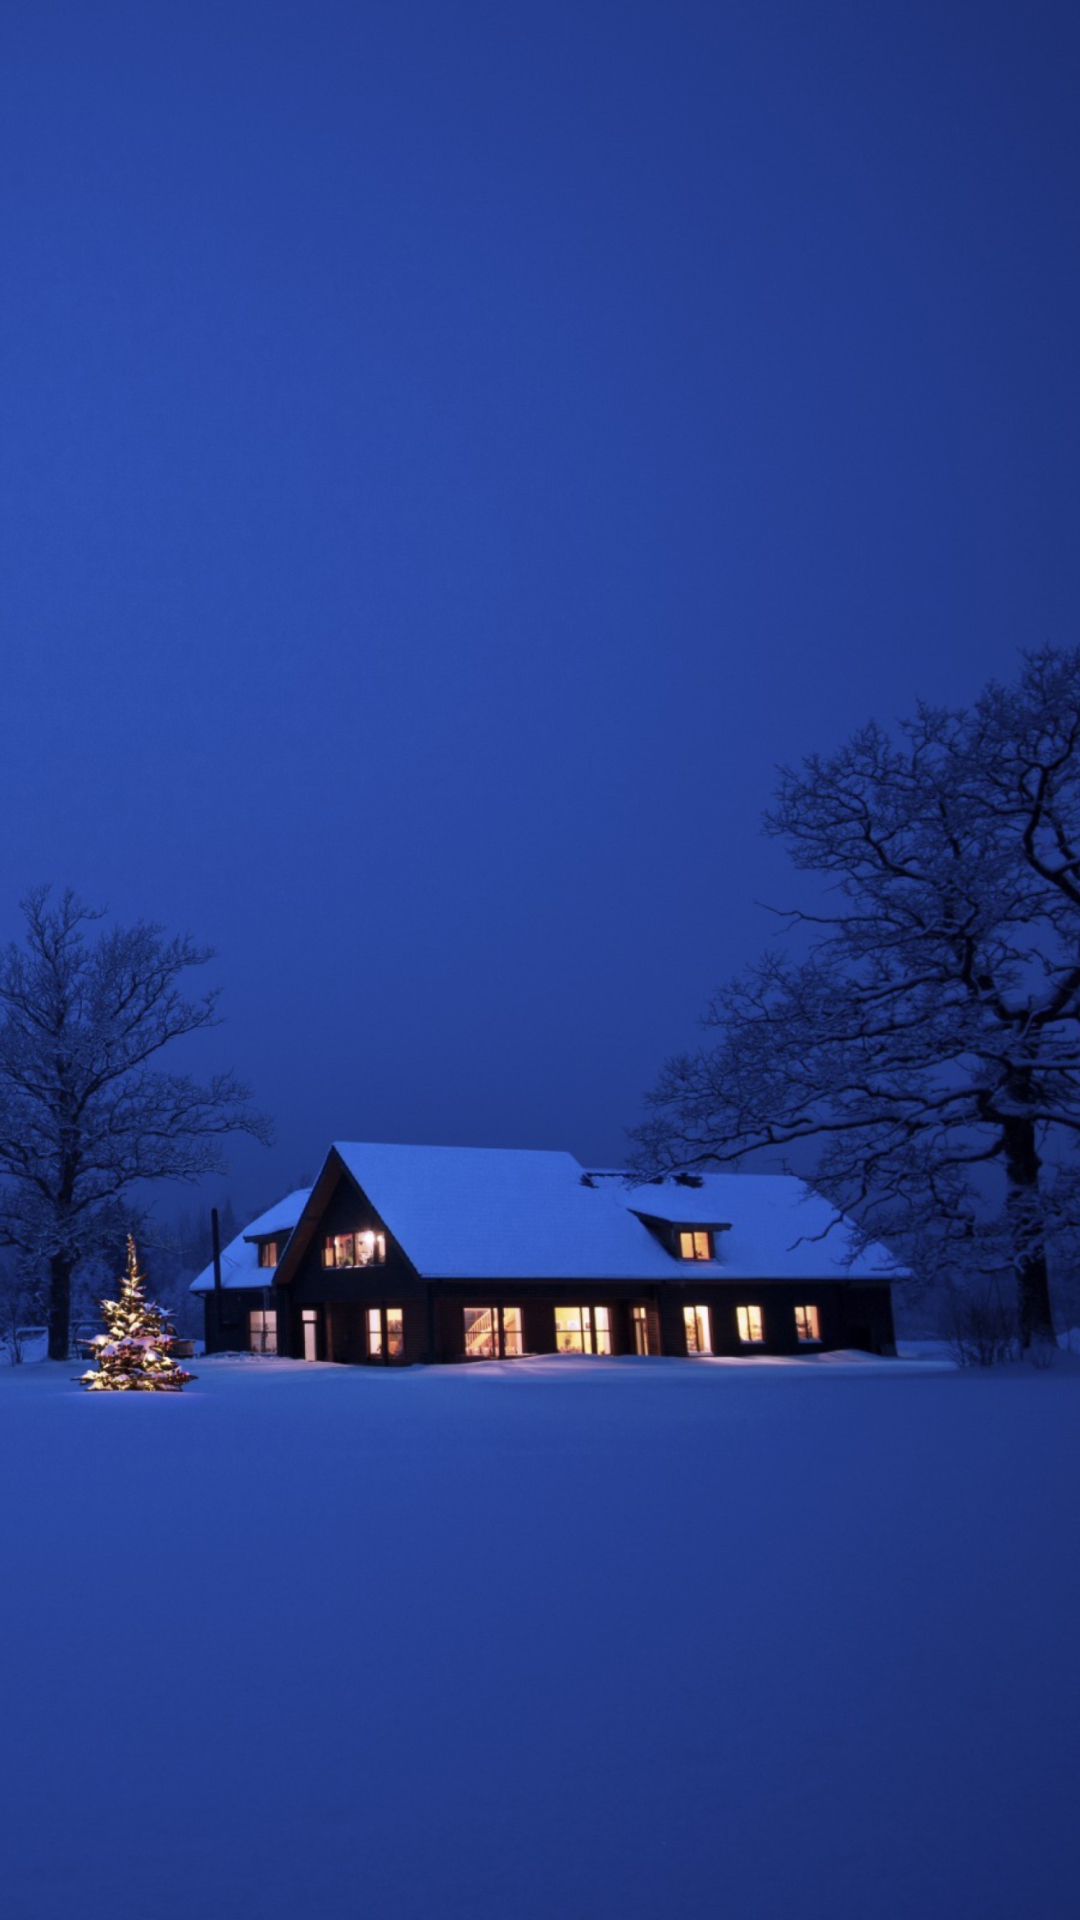 Lonely House, Winter Landscape And Christmas Tree wallpaper 1080x1920